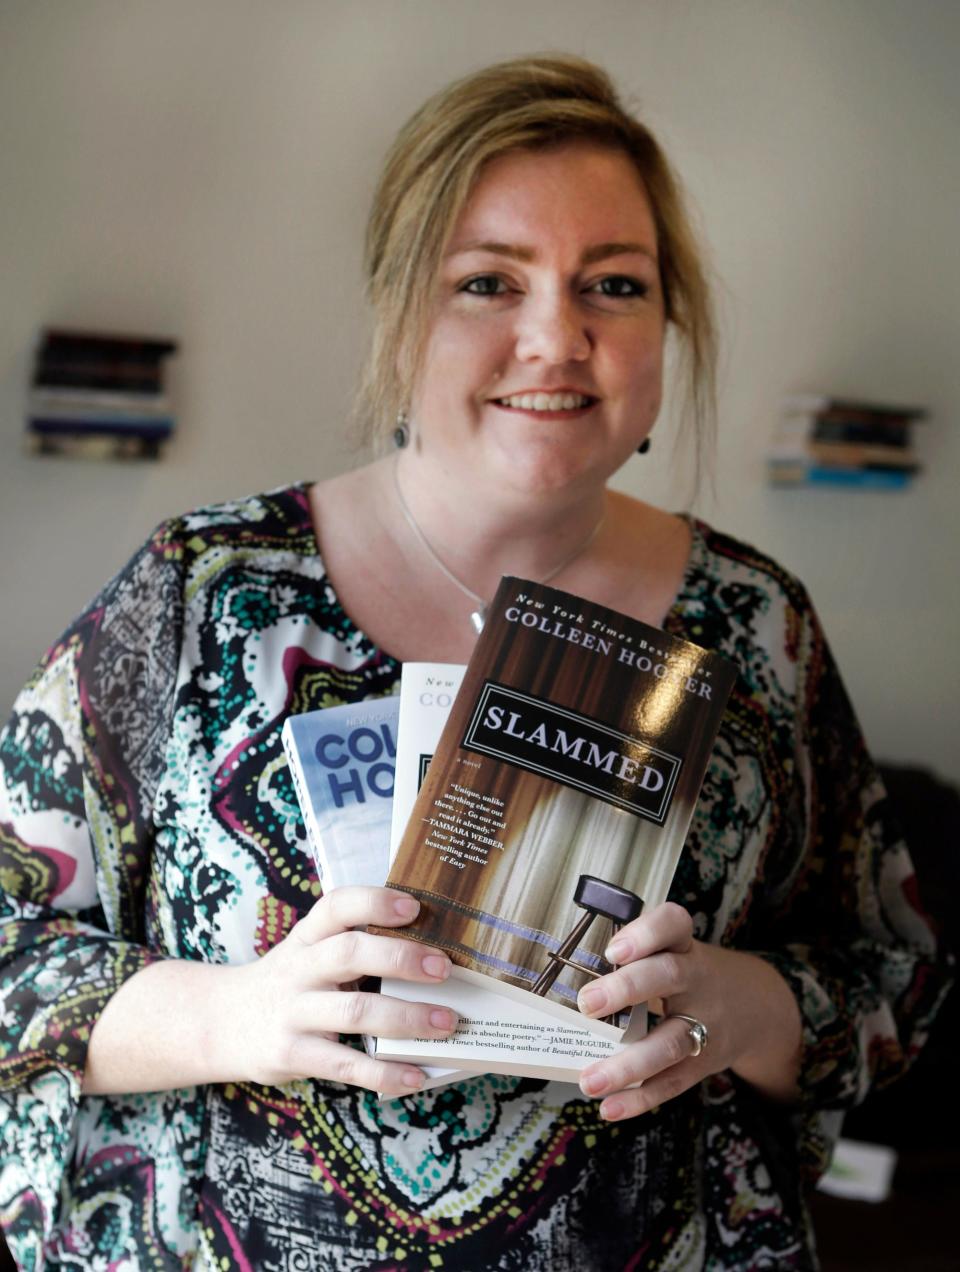 Colleen Hoover holds copies of her books.